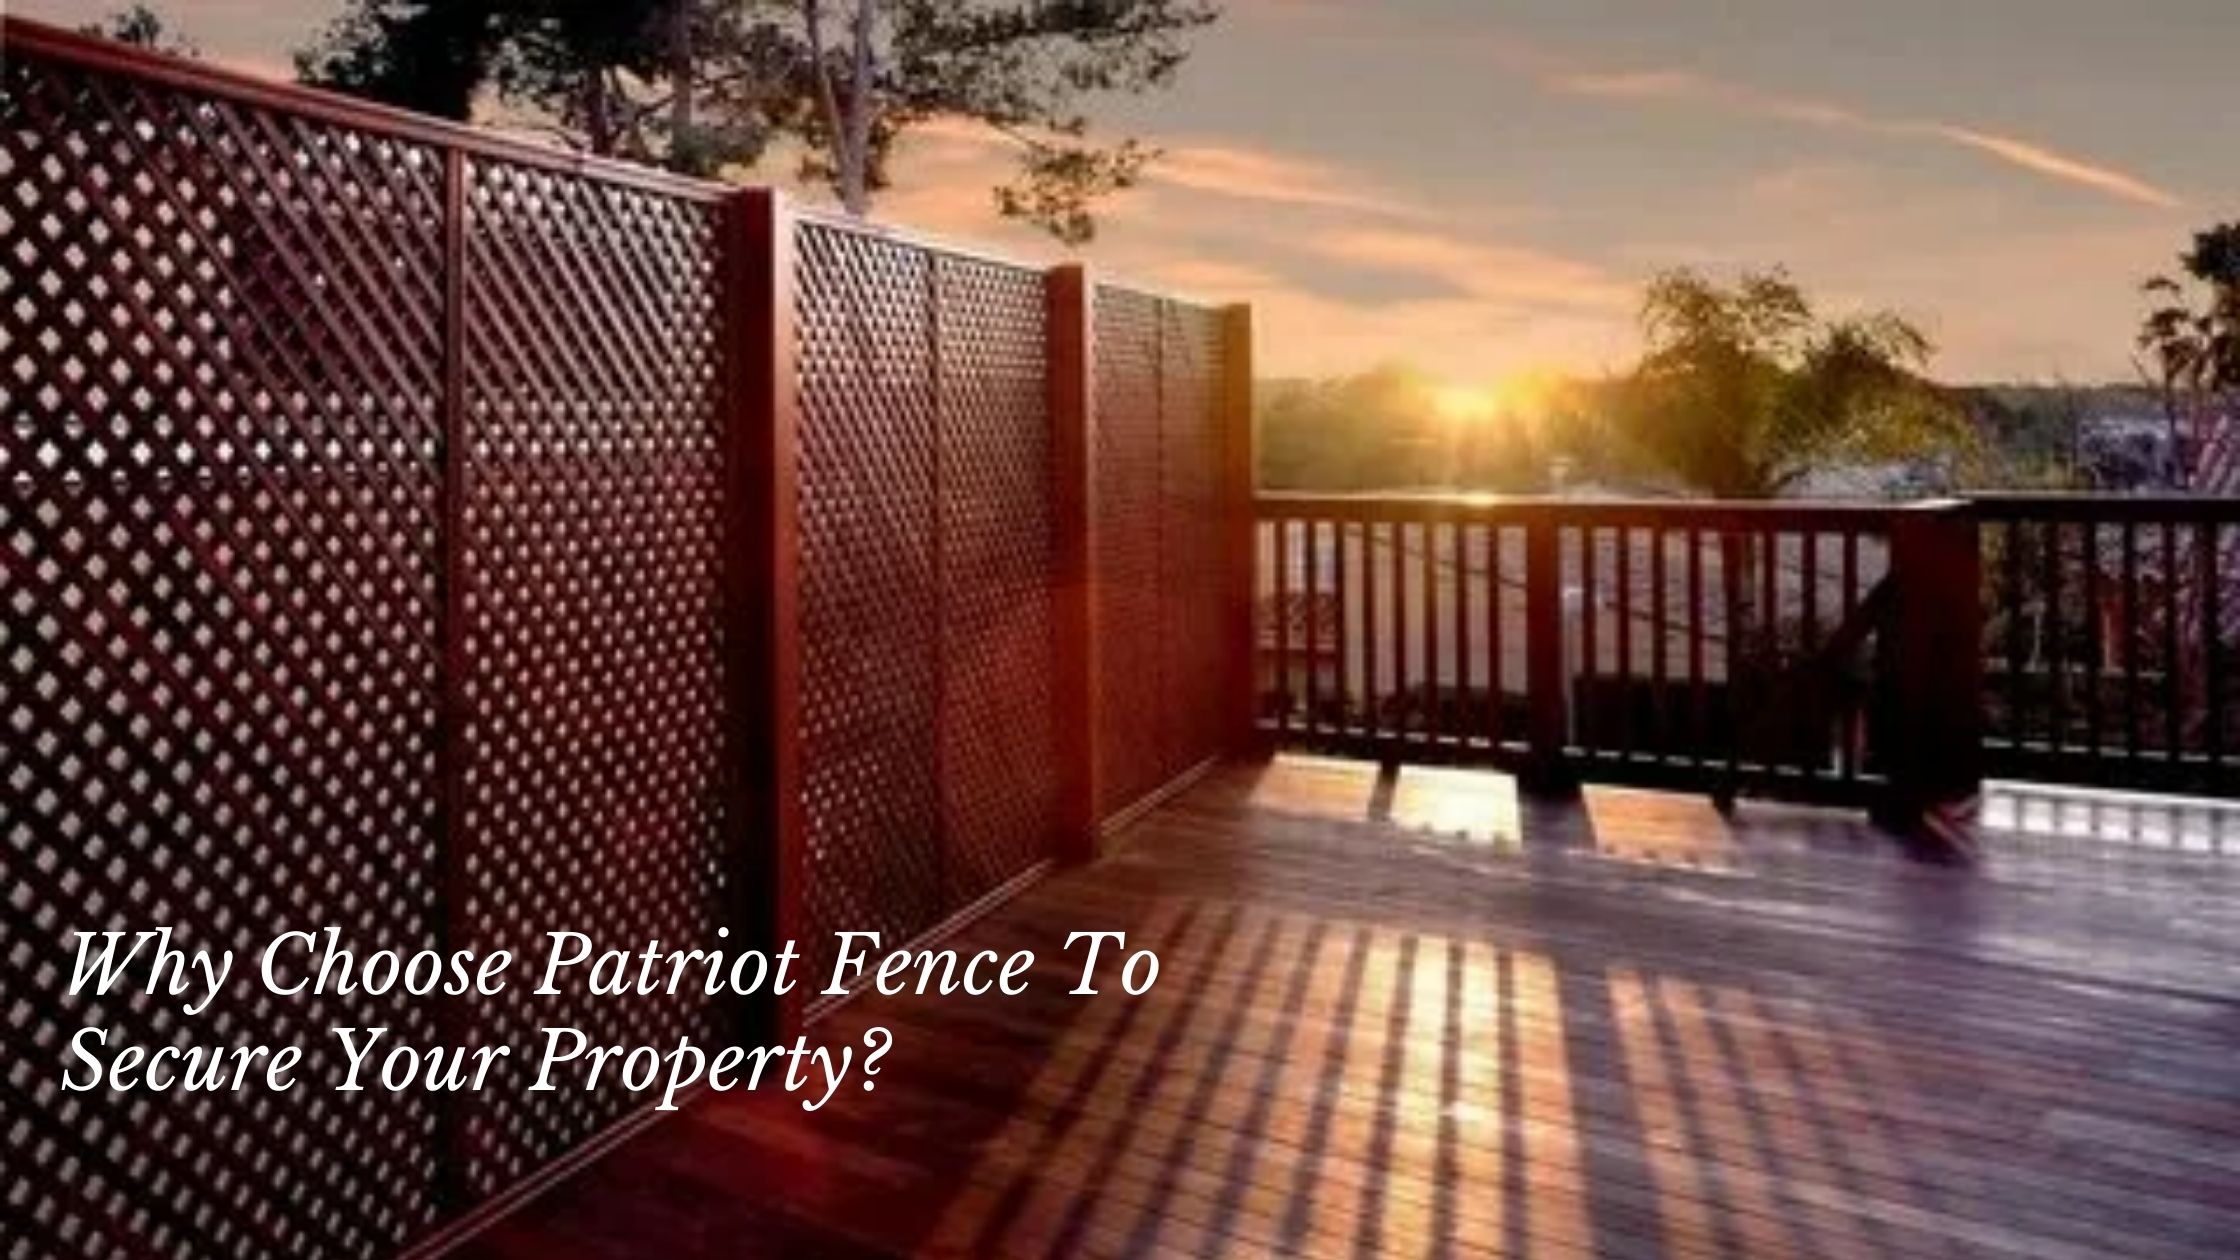 Why Choose Patriot Fence To Secure Your Property